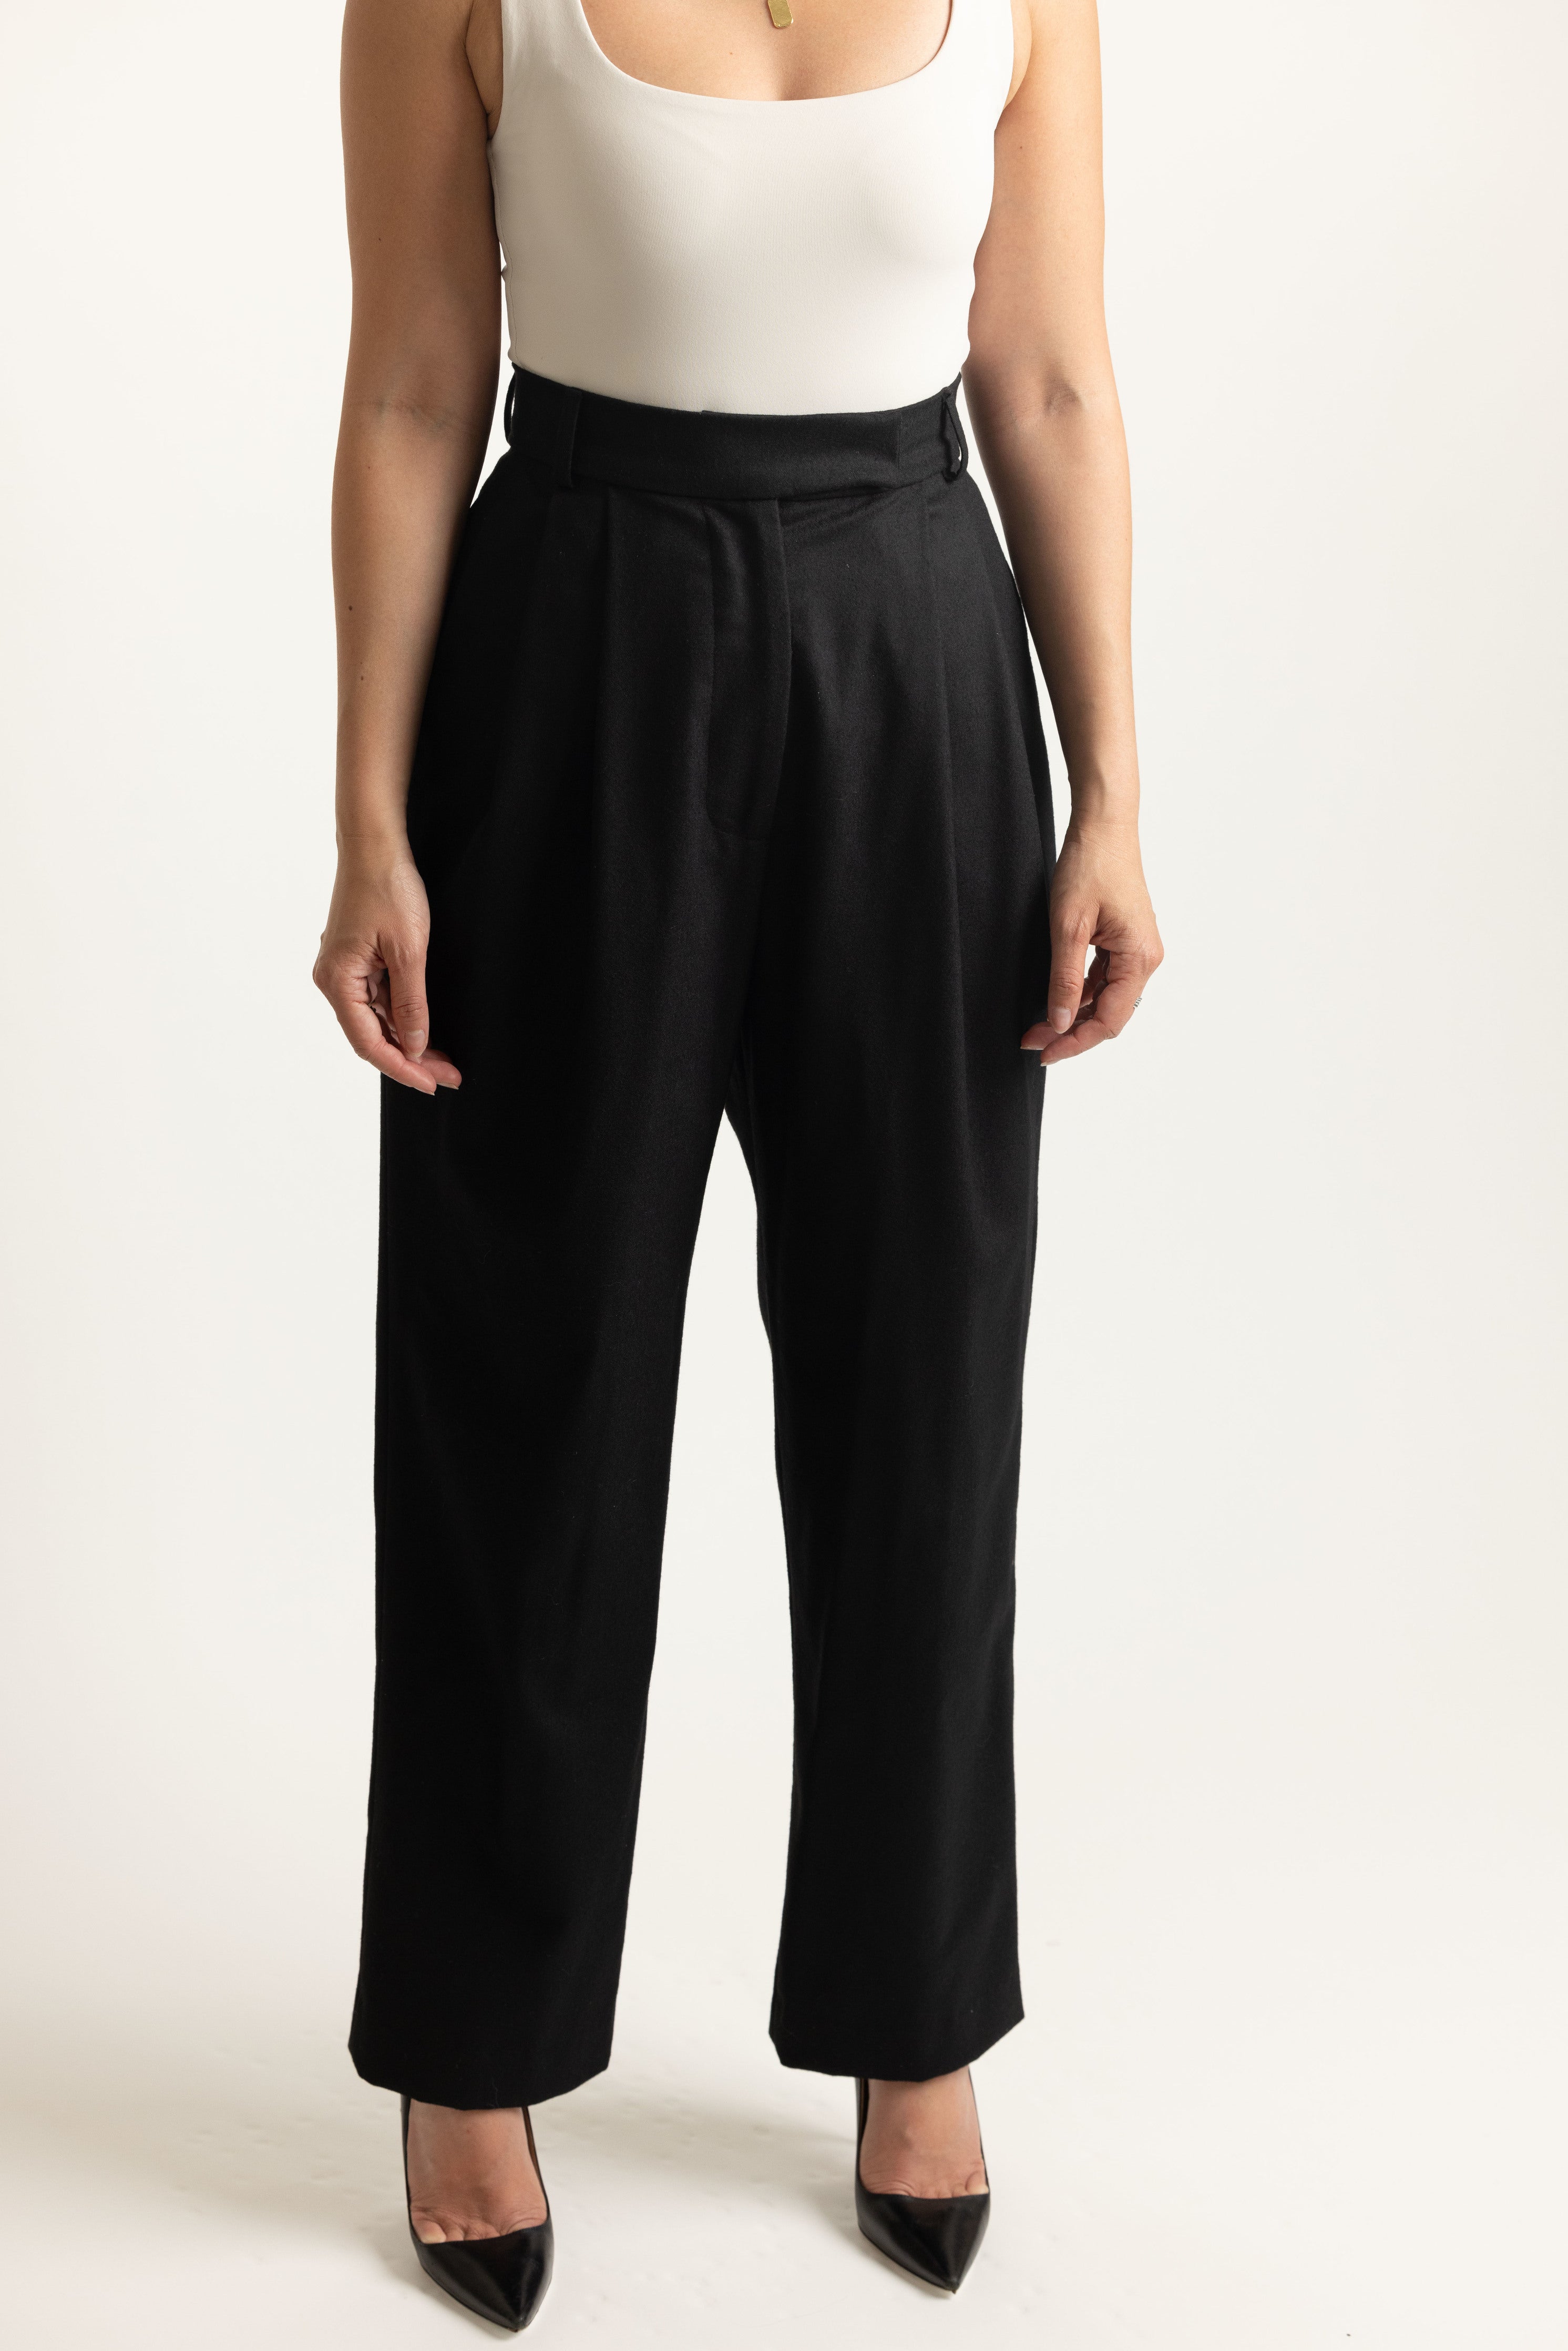 Trial Trouser in Black - front view